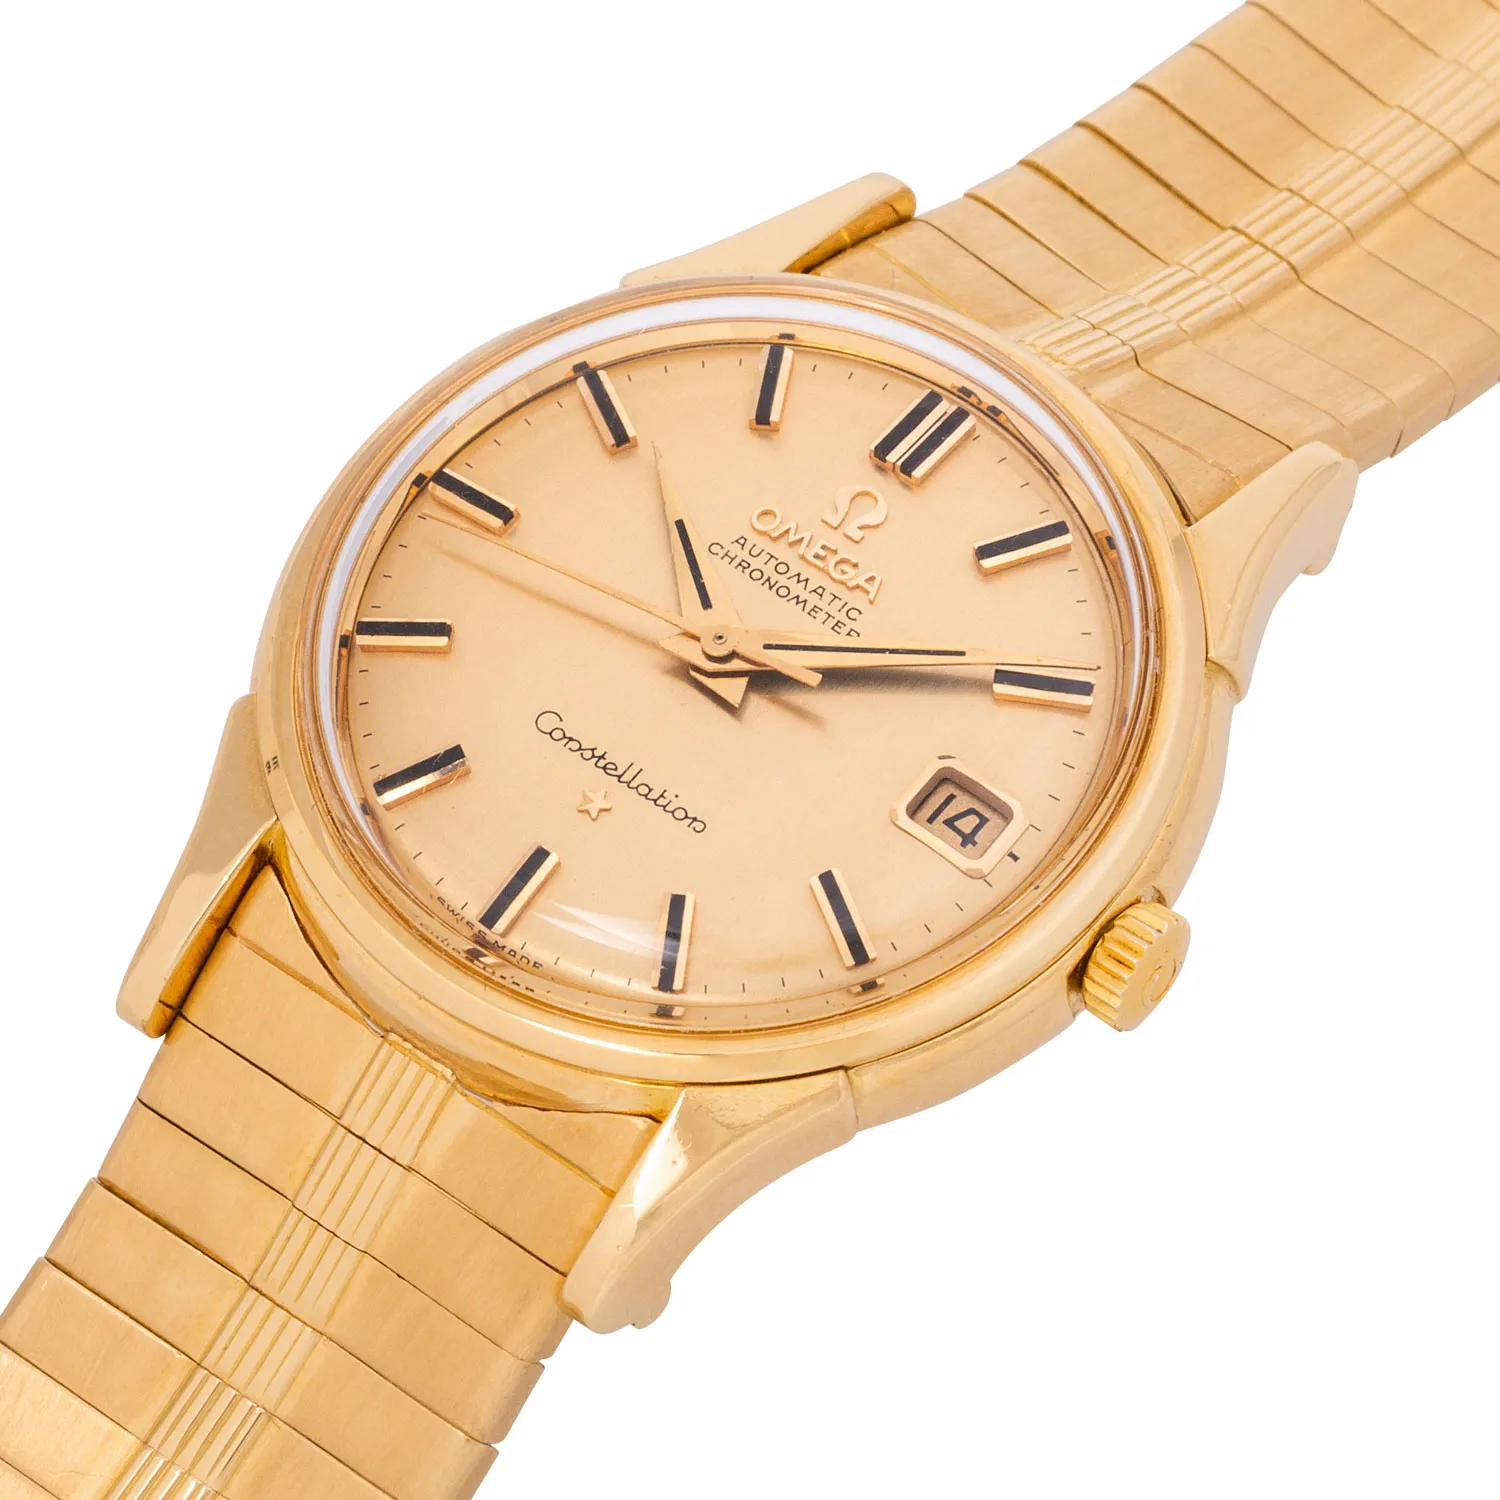 Omega Constellation 14393 35mm Yellow gold Gold 5